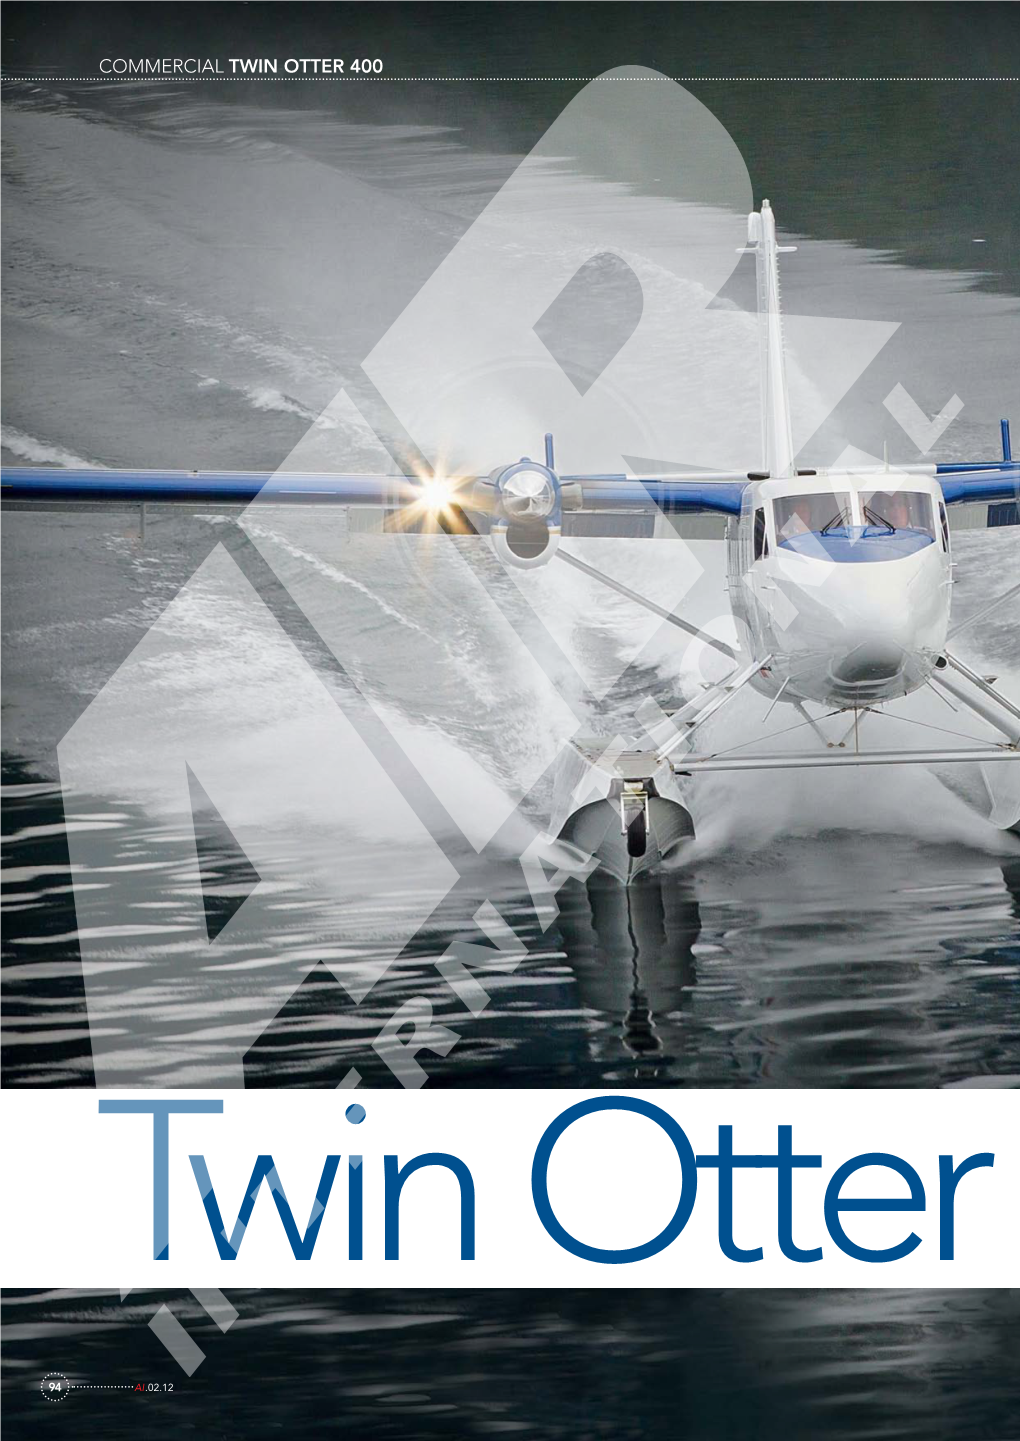 Air International Highlights the "Rebirth" of the Twin Otter by Viking